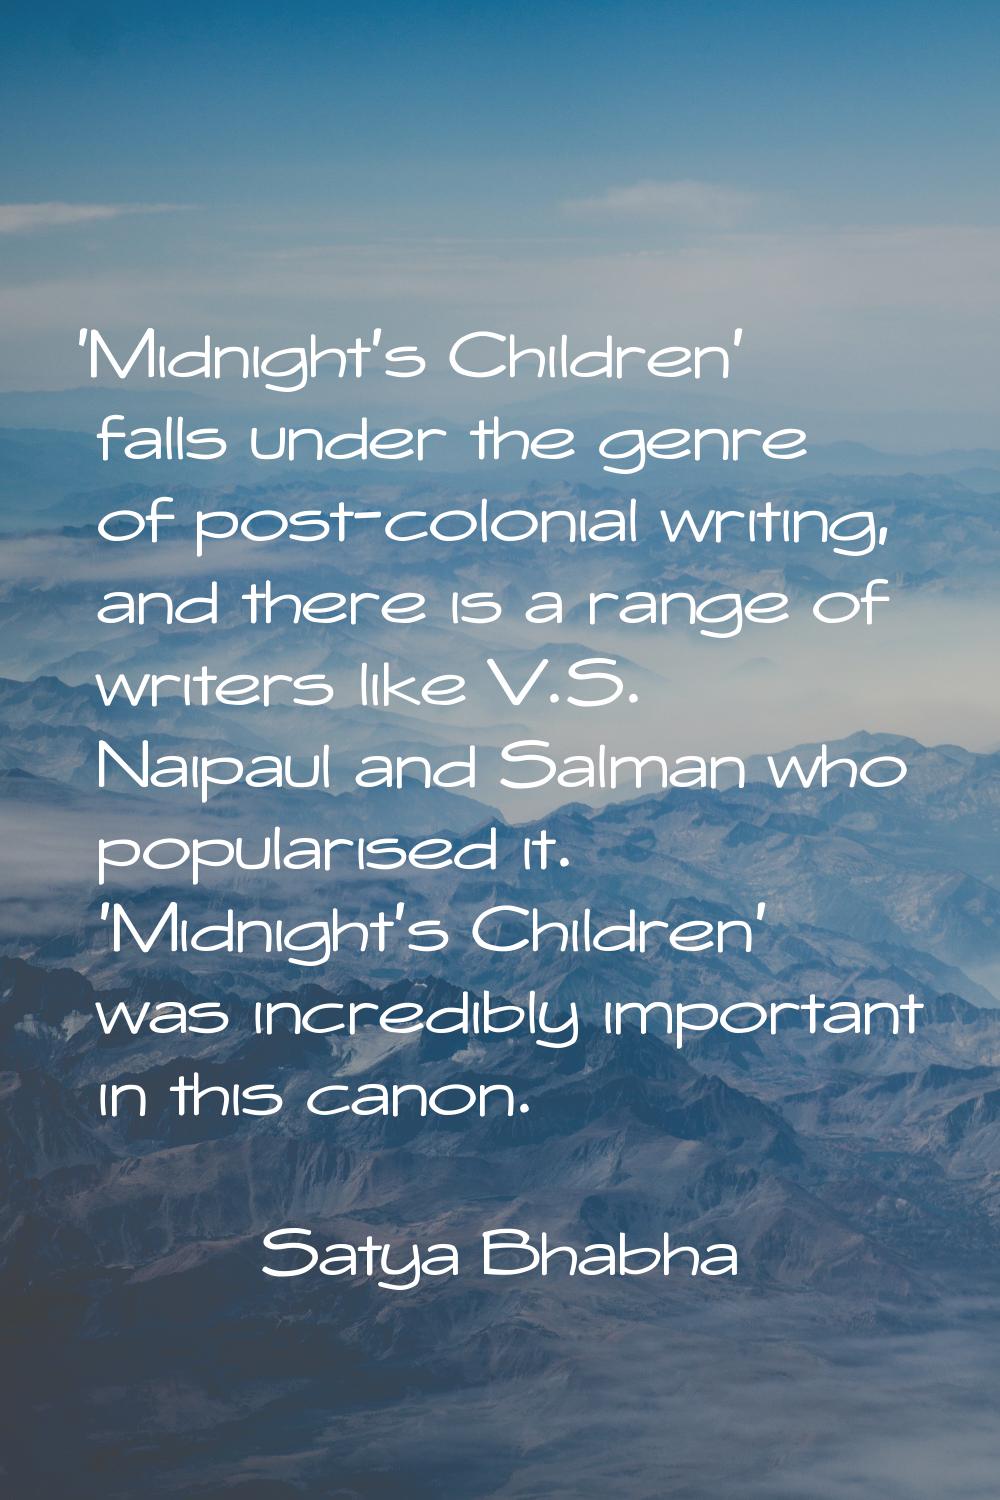 'Midnight's Children' falls under the genre of post-colonial writing, and there is a range of write